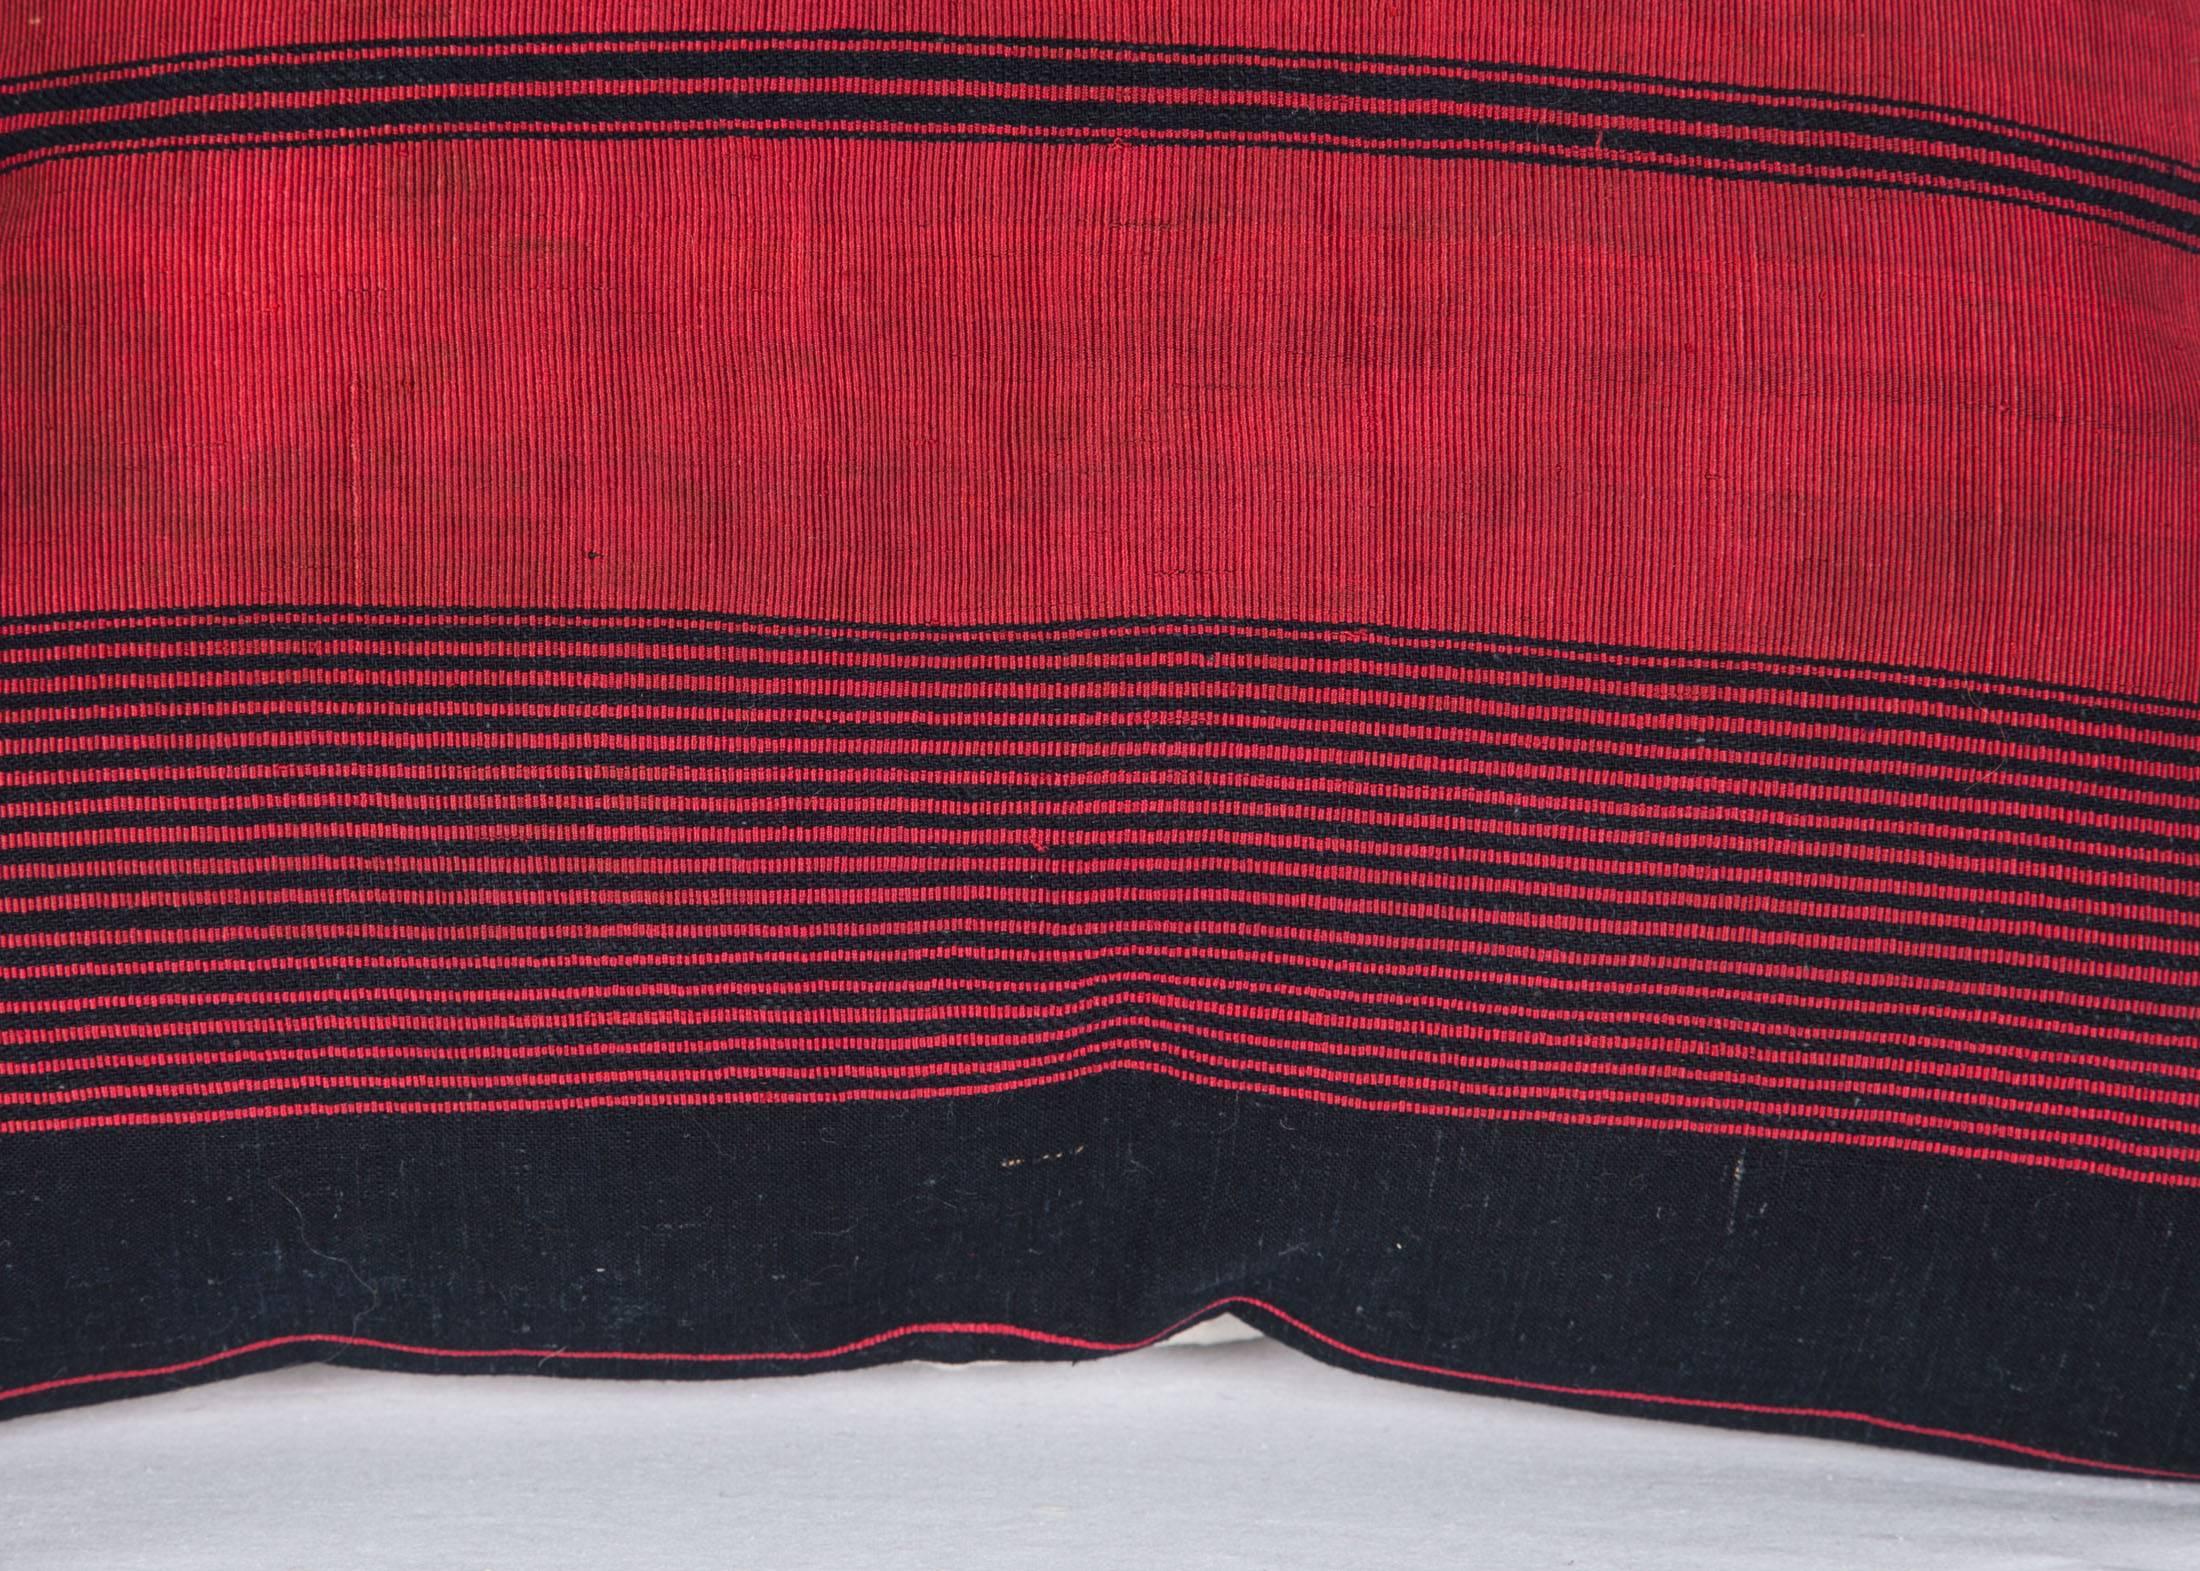 Woven Late 19th-Early 20th Century Afghan Waziri Shawl Pillow